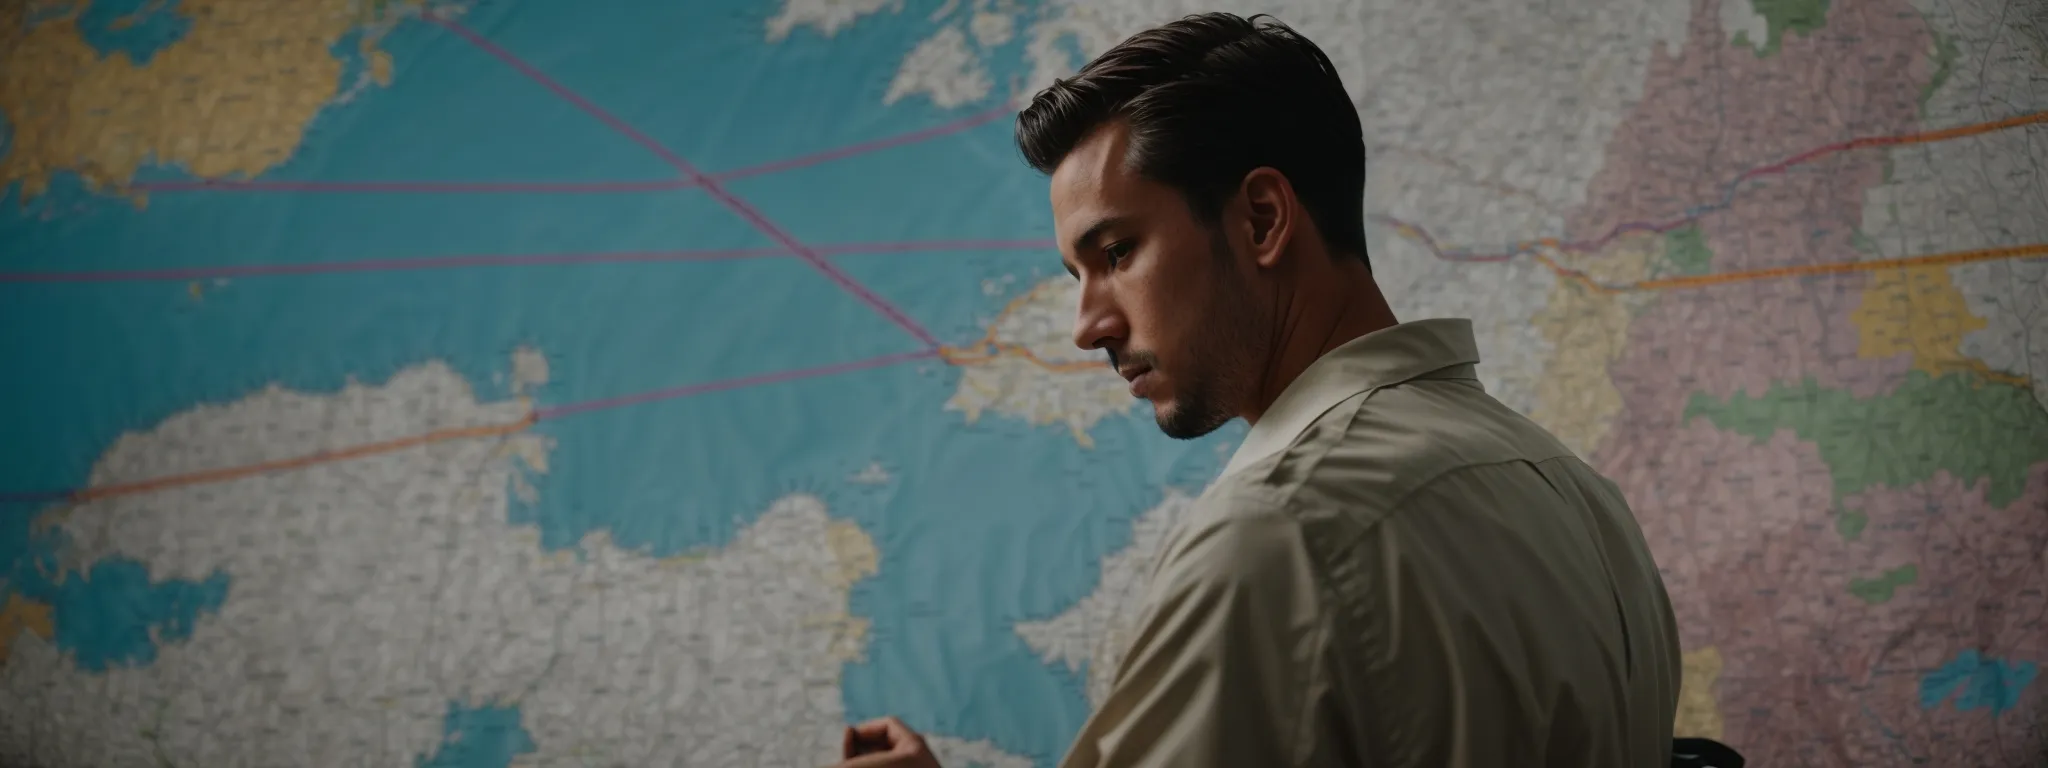 a strategist peers intently at a broad, colorful map dotted with markers and interconnected lines, representing a battlefield of seo dominance.